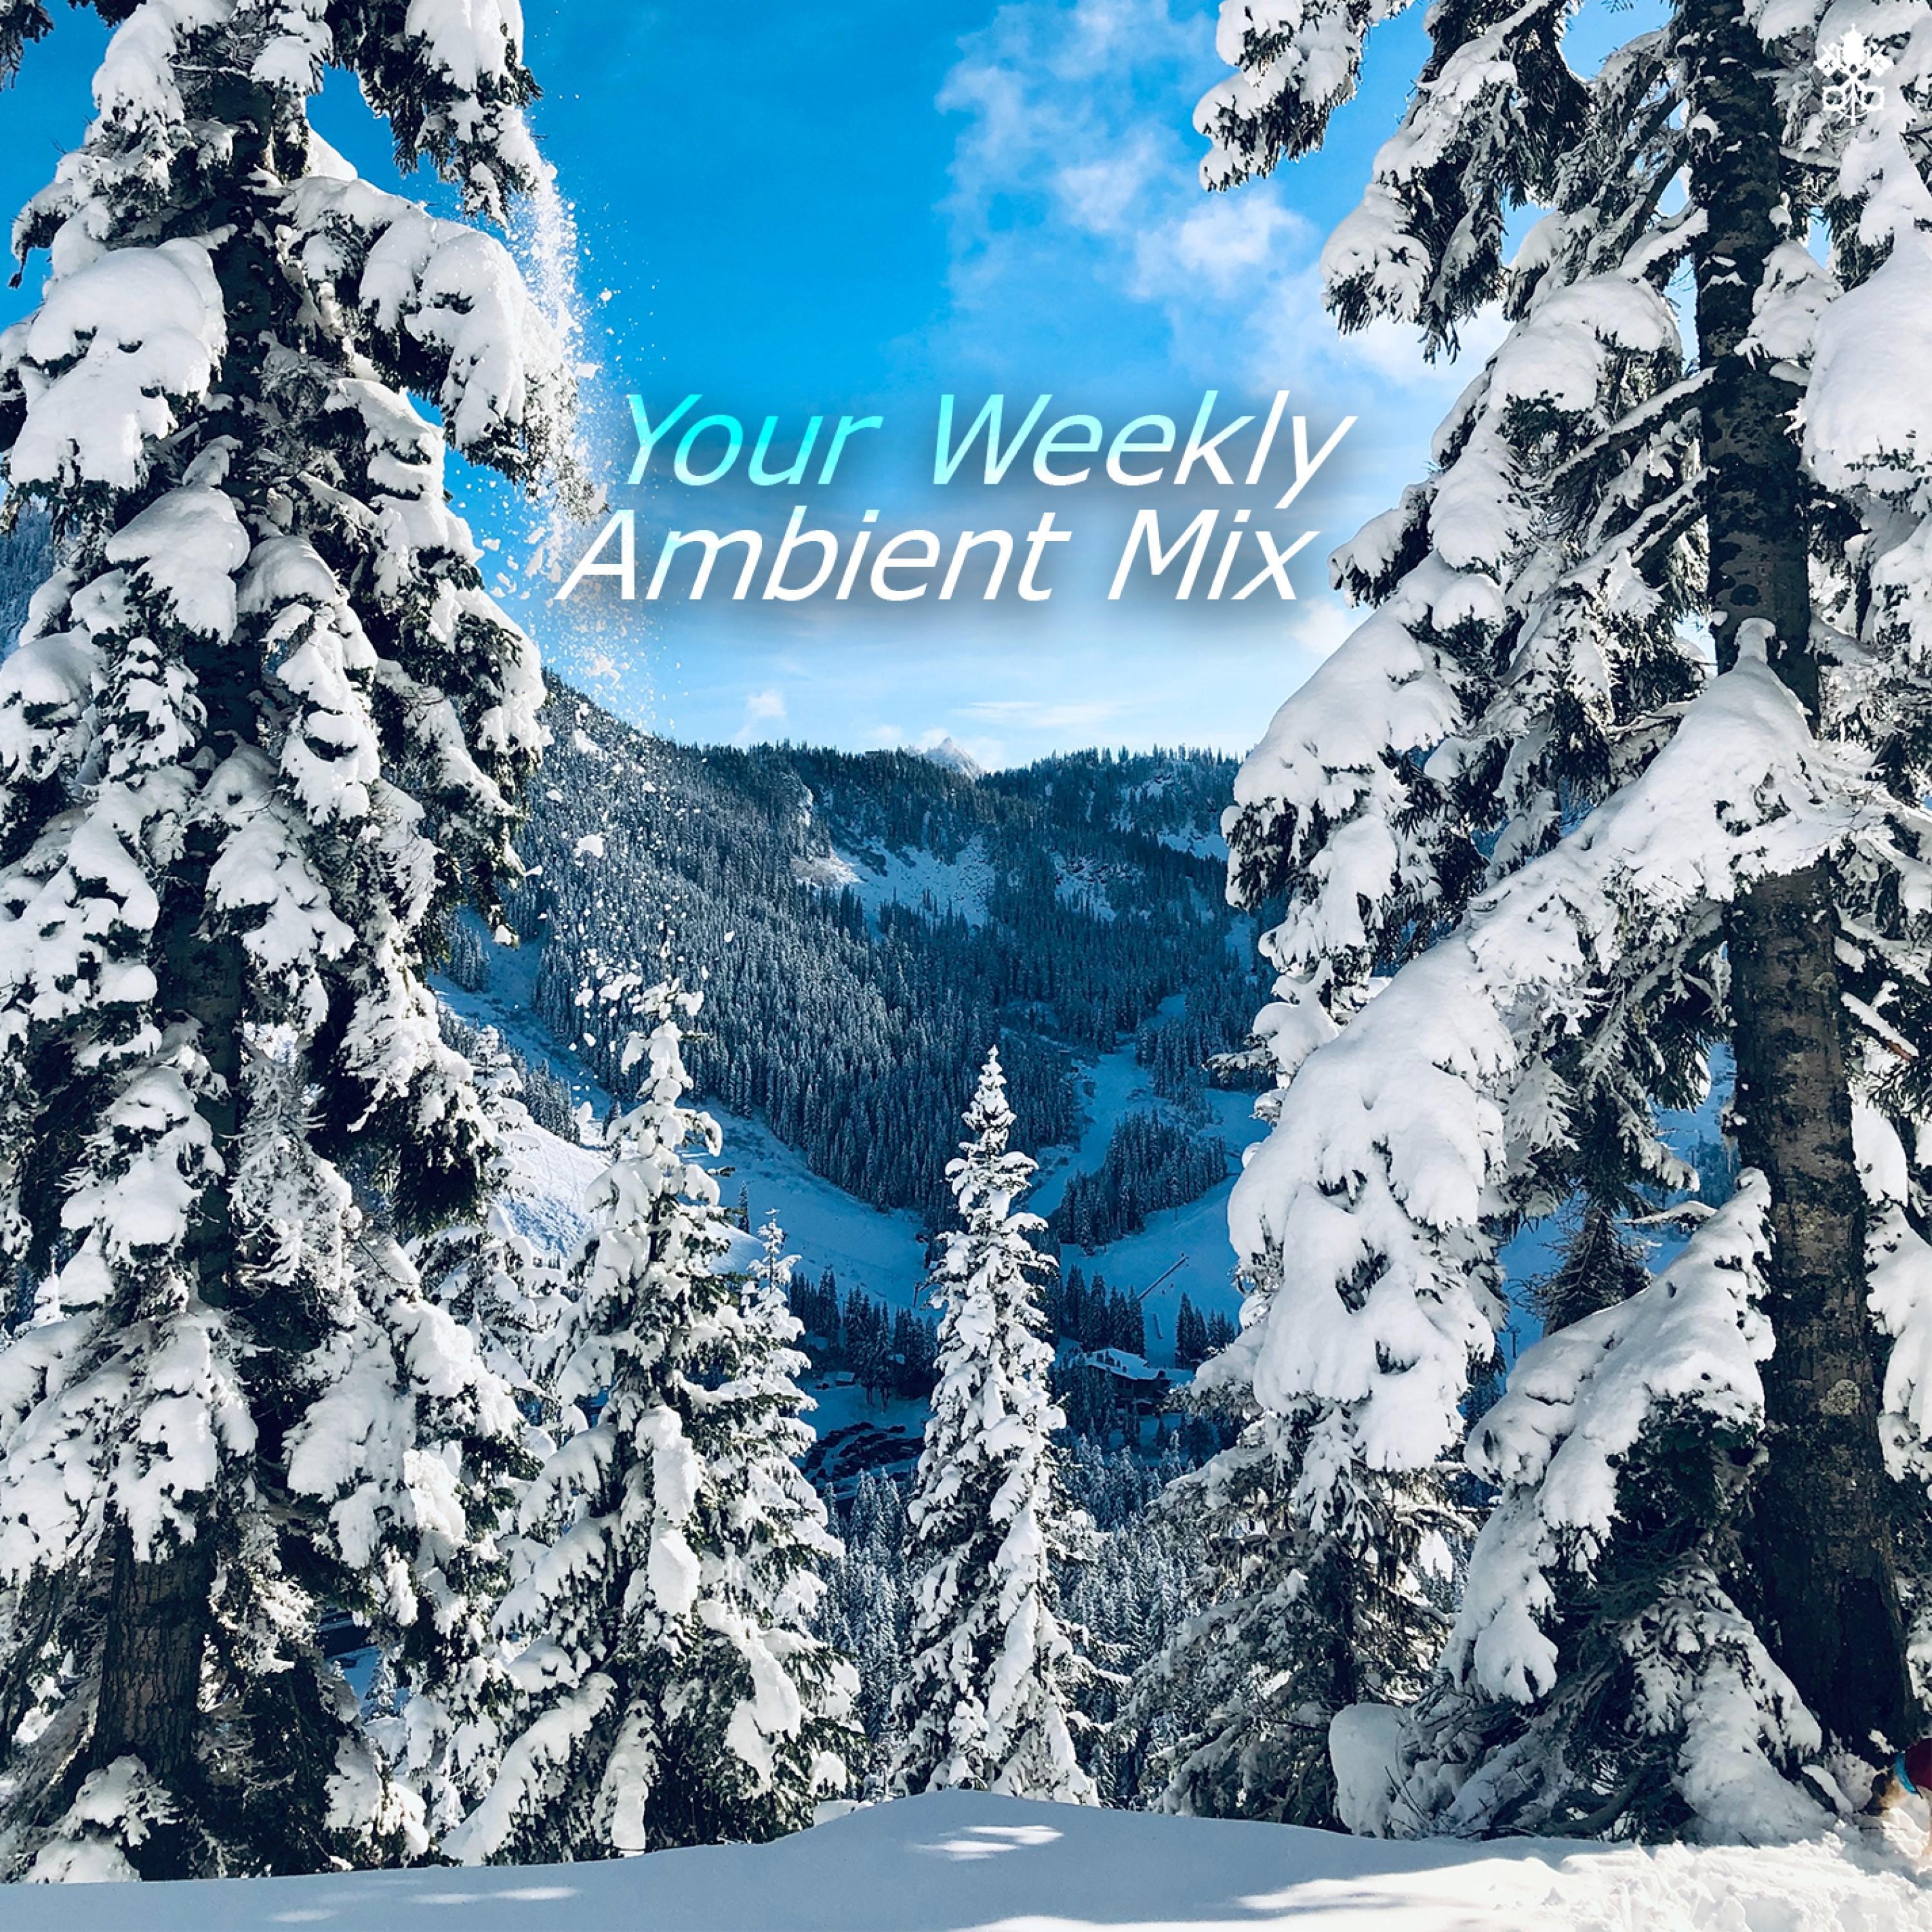 Your Weekly Ambient Mix